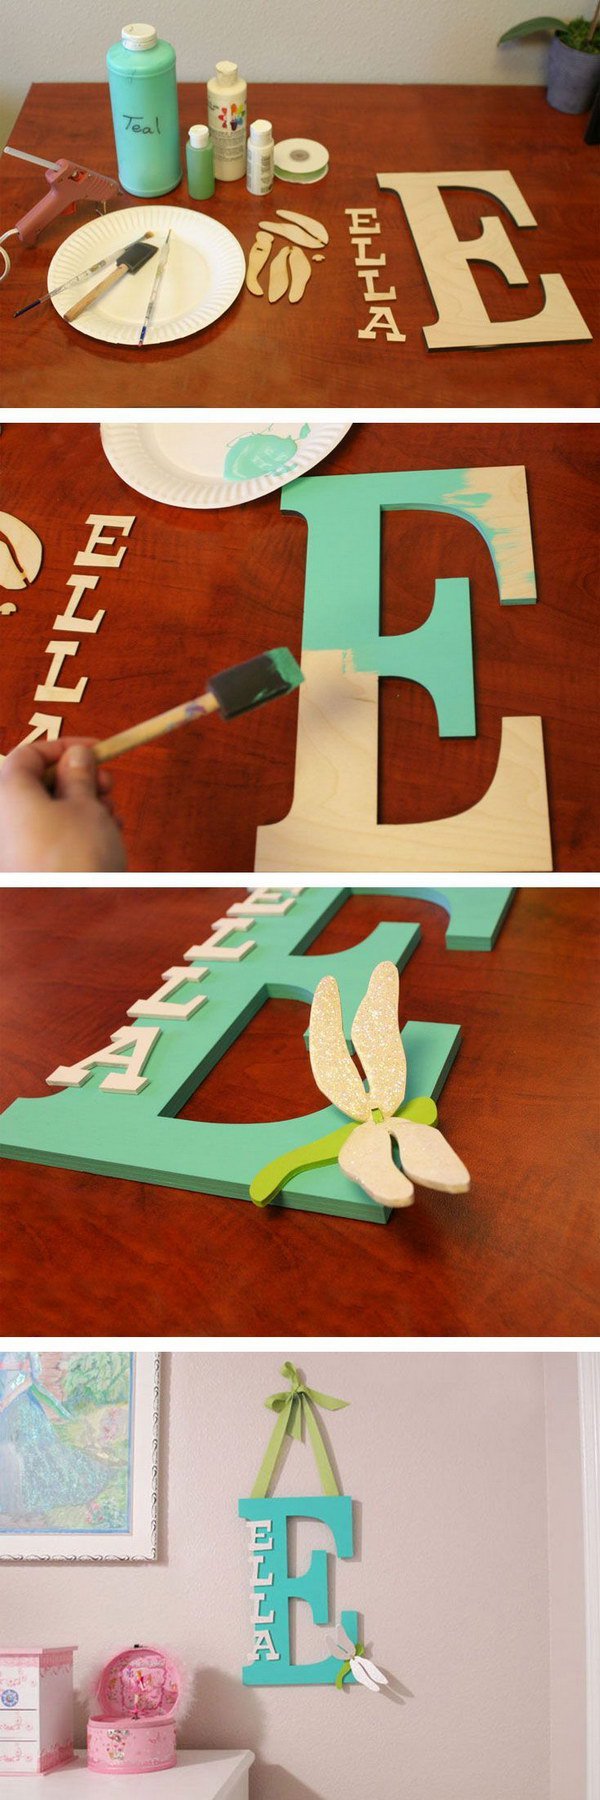 25 Creative DIY Ideas and Tutorials to Make Decorative Letters